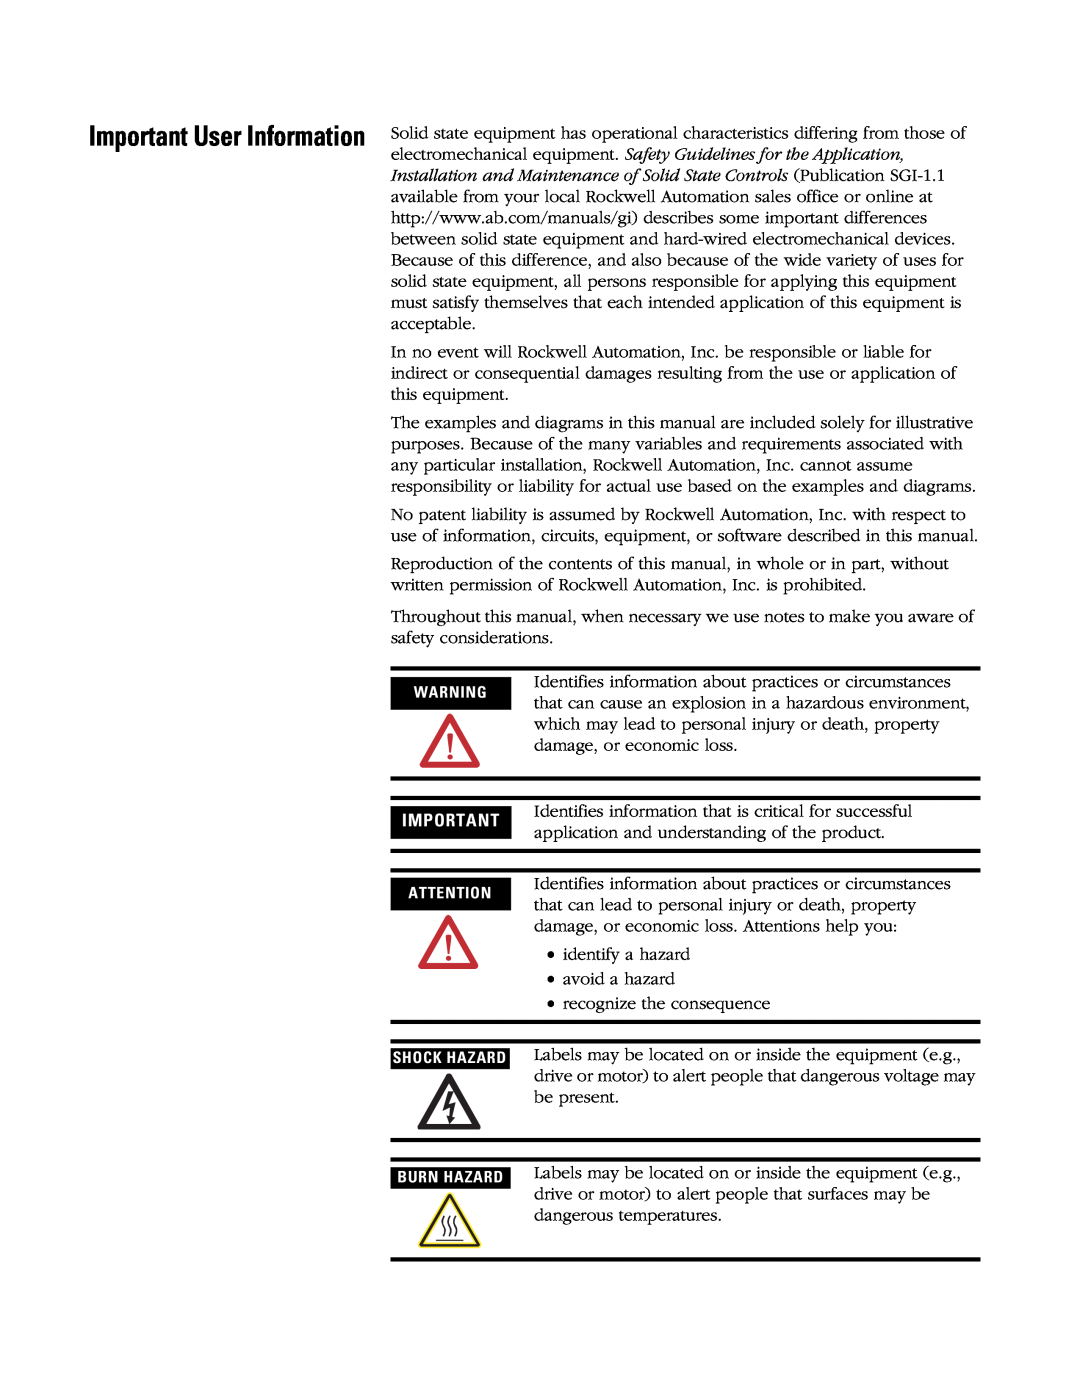 AB Soft 1760 manual Important User Information, electromechanical equipment. Safety Guidelines for the Application 